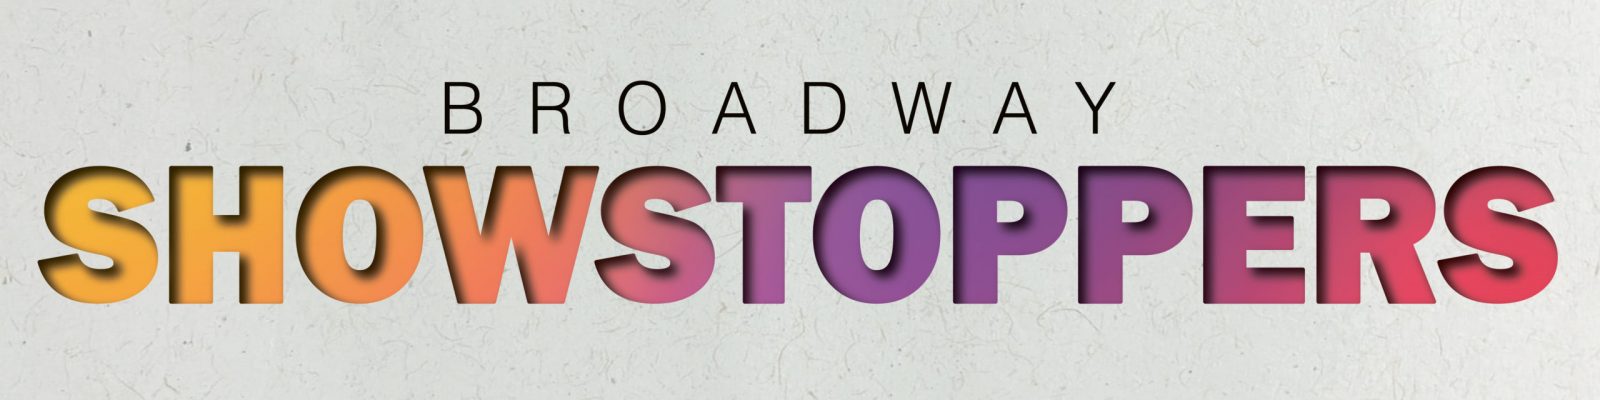 221119_BroadwayShowStoppers_header_1600x400